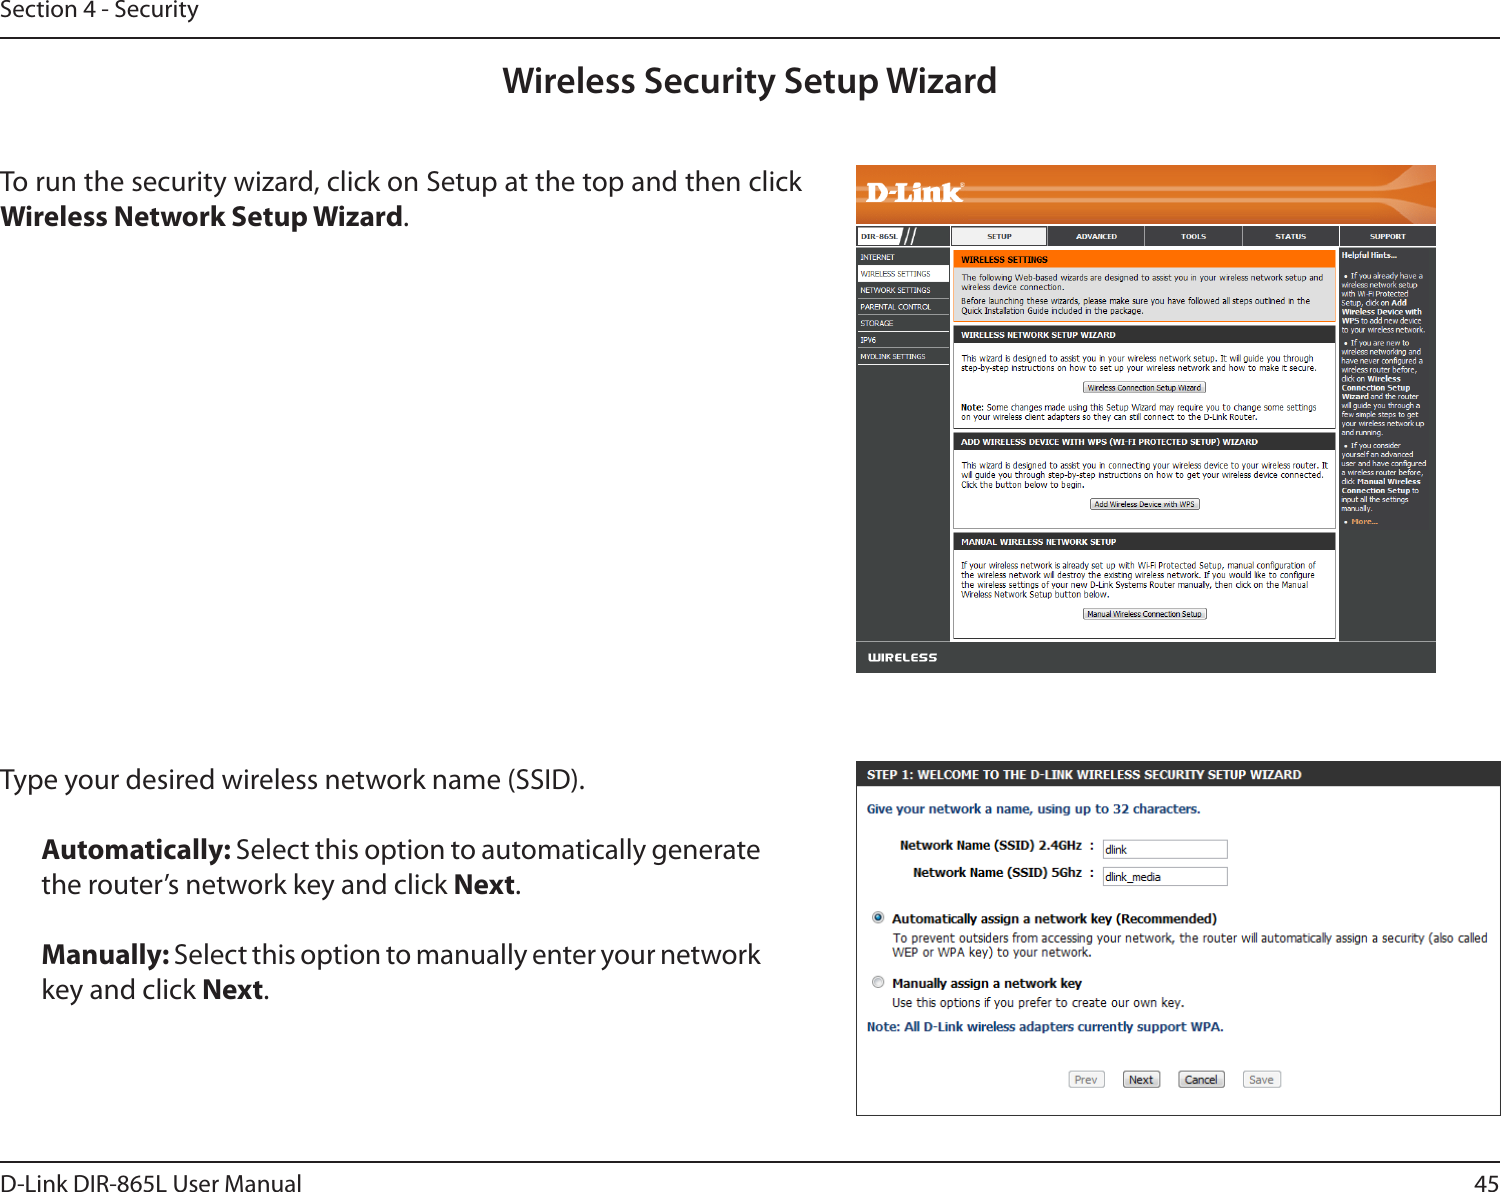 45D-Link DIR-865L User ManualSection 4 - SecurityWireless Security Setup WizardTo run the security wizard, click on Setup at the top and then click Wireless Network Setup Wizard.Type your desired wireless network name (SSID). Automatically: Select this option to automatically generate the router’s network key and click Next.Manually: Select this option to manually enter your network key and click Next.